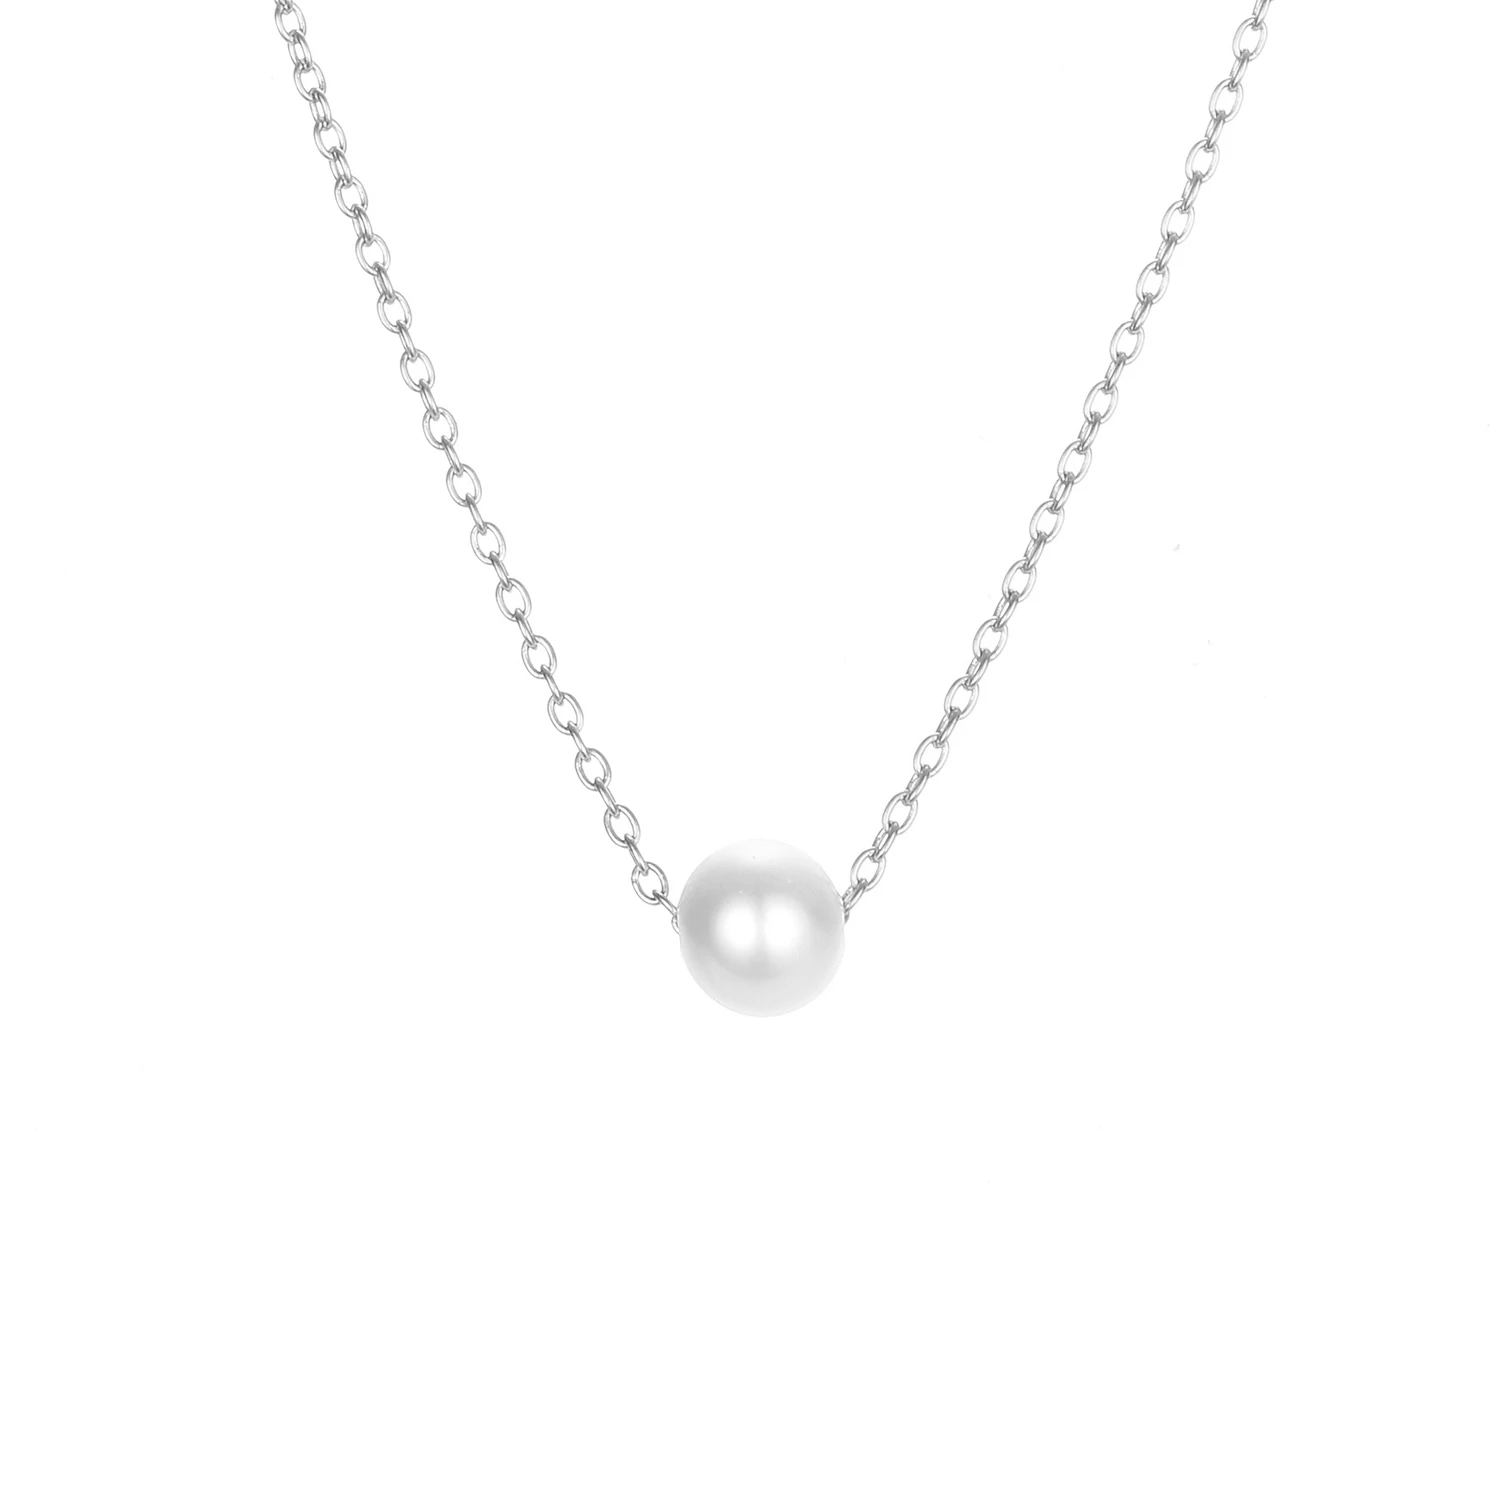 

Minimalist Simple Jewelry Chain Necklace for Women 316L Stainless Steel 4MM Pearl Pendant Choker Necklace, Silver/14k gold/rose gold